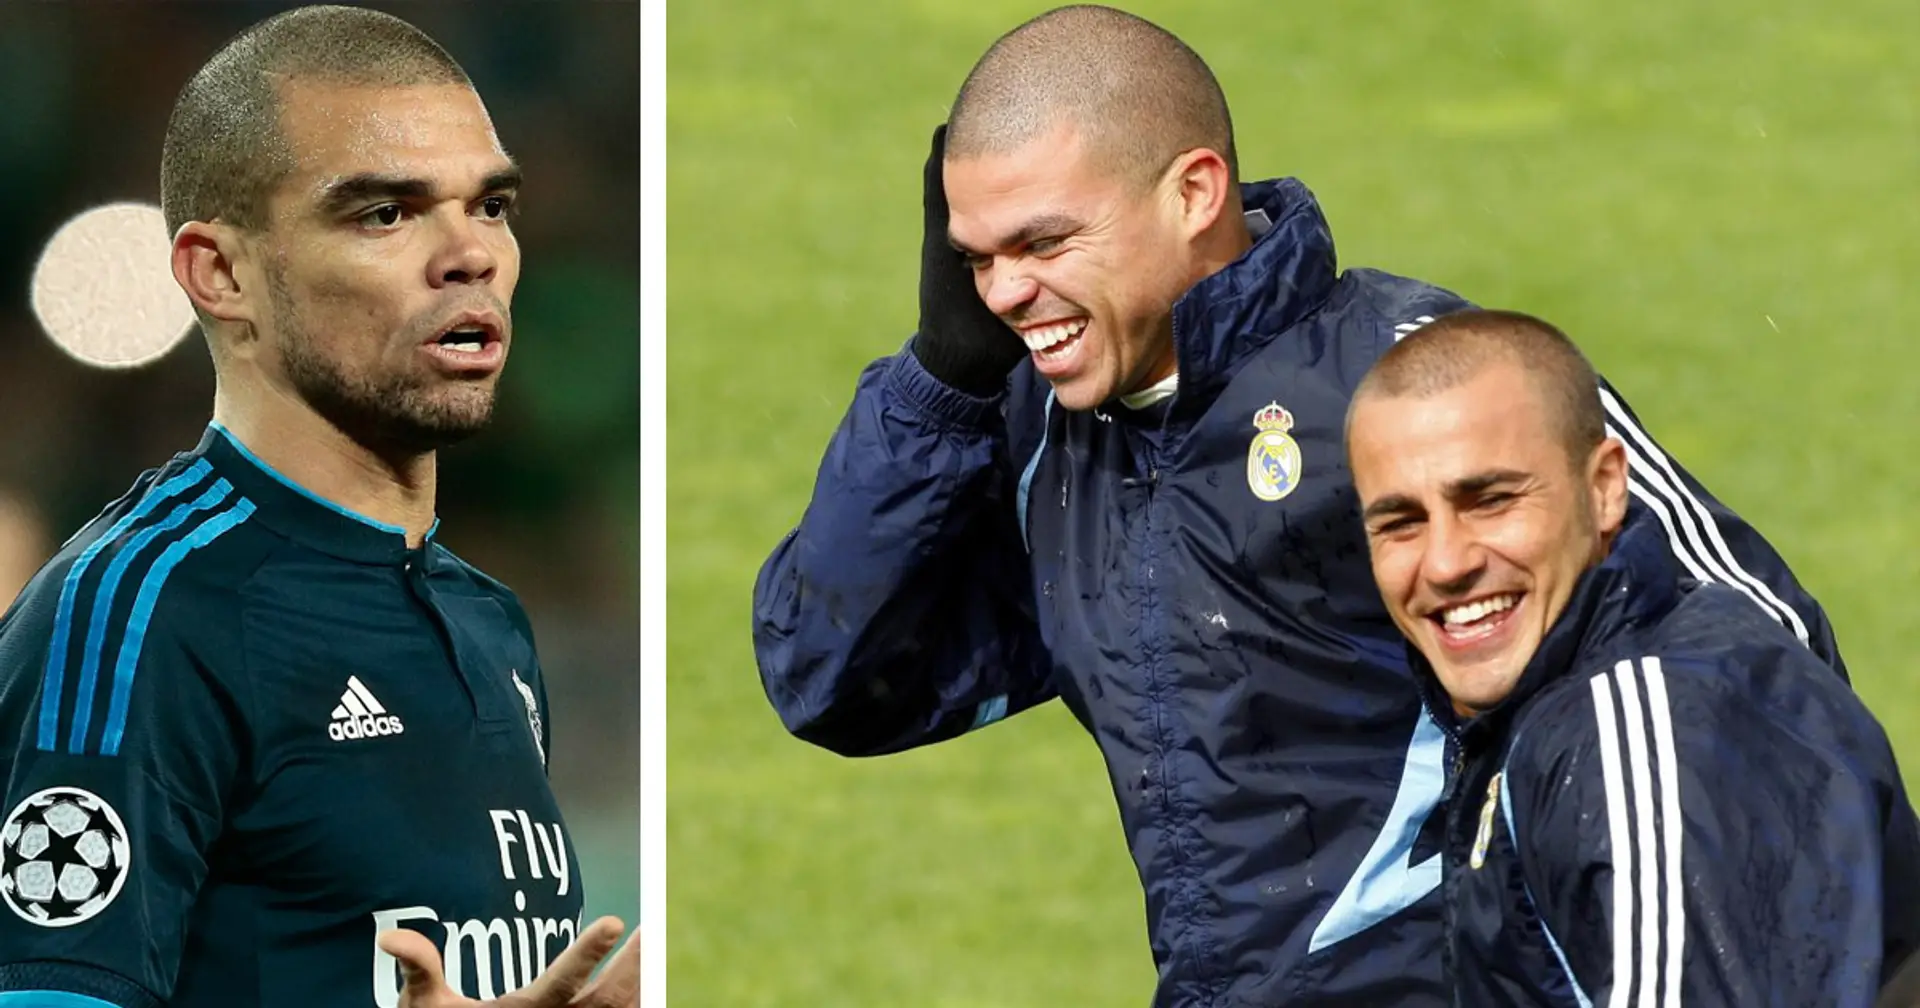 Pepe opens up on funny interaction between him and Cannavaro in his first days at Madrid